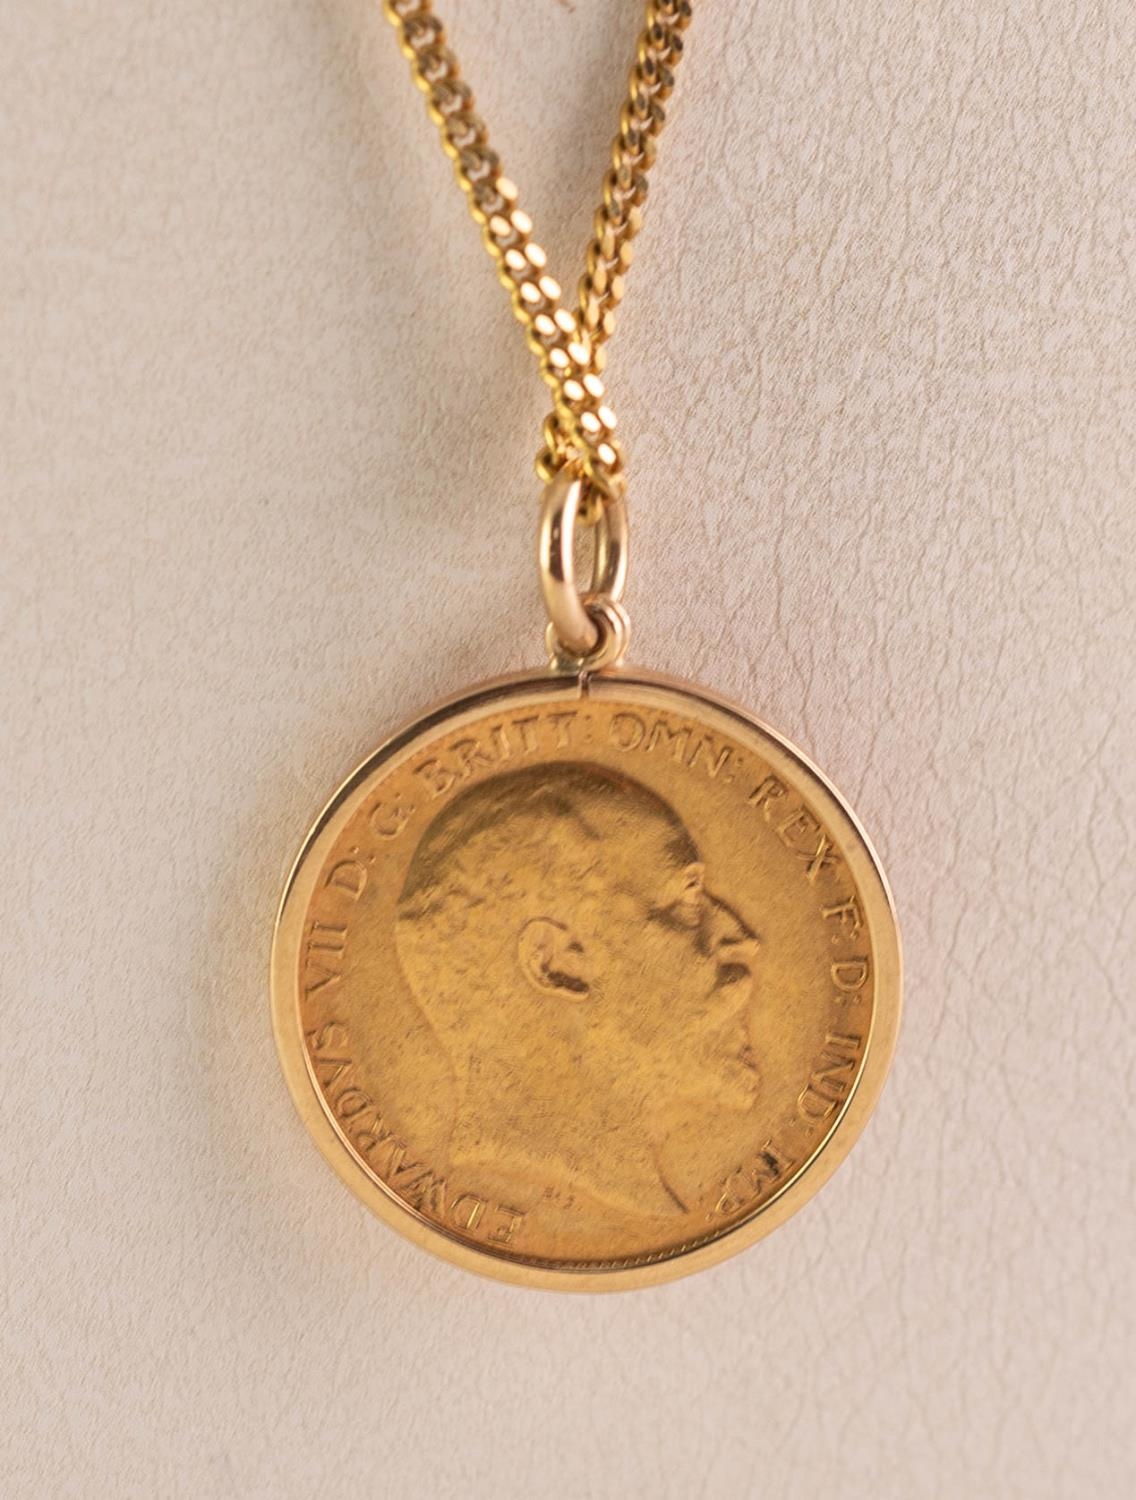 EDWARD VII 1909 GOLD HALF SOVEREIGN, loose framed as a pendant and the 9ct GOLD FINE CHAIN NECKLACE, - Image 3 of 3